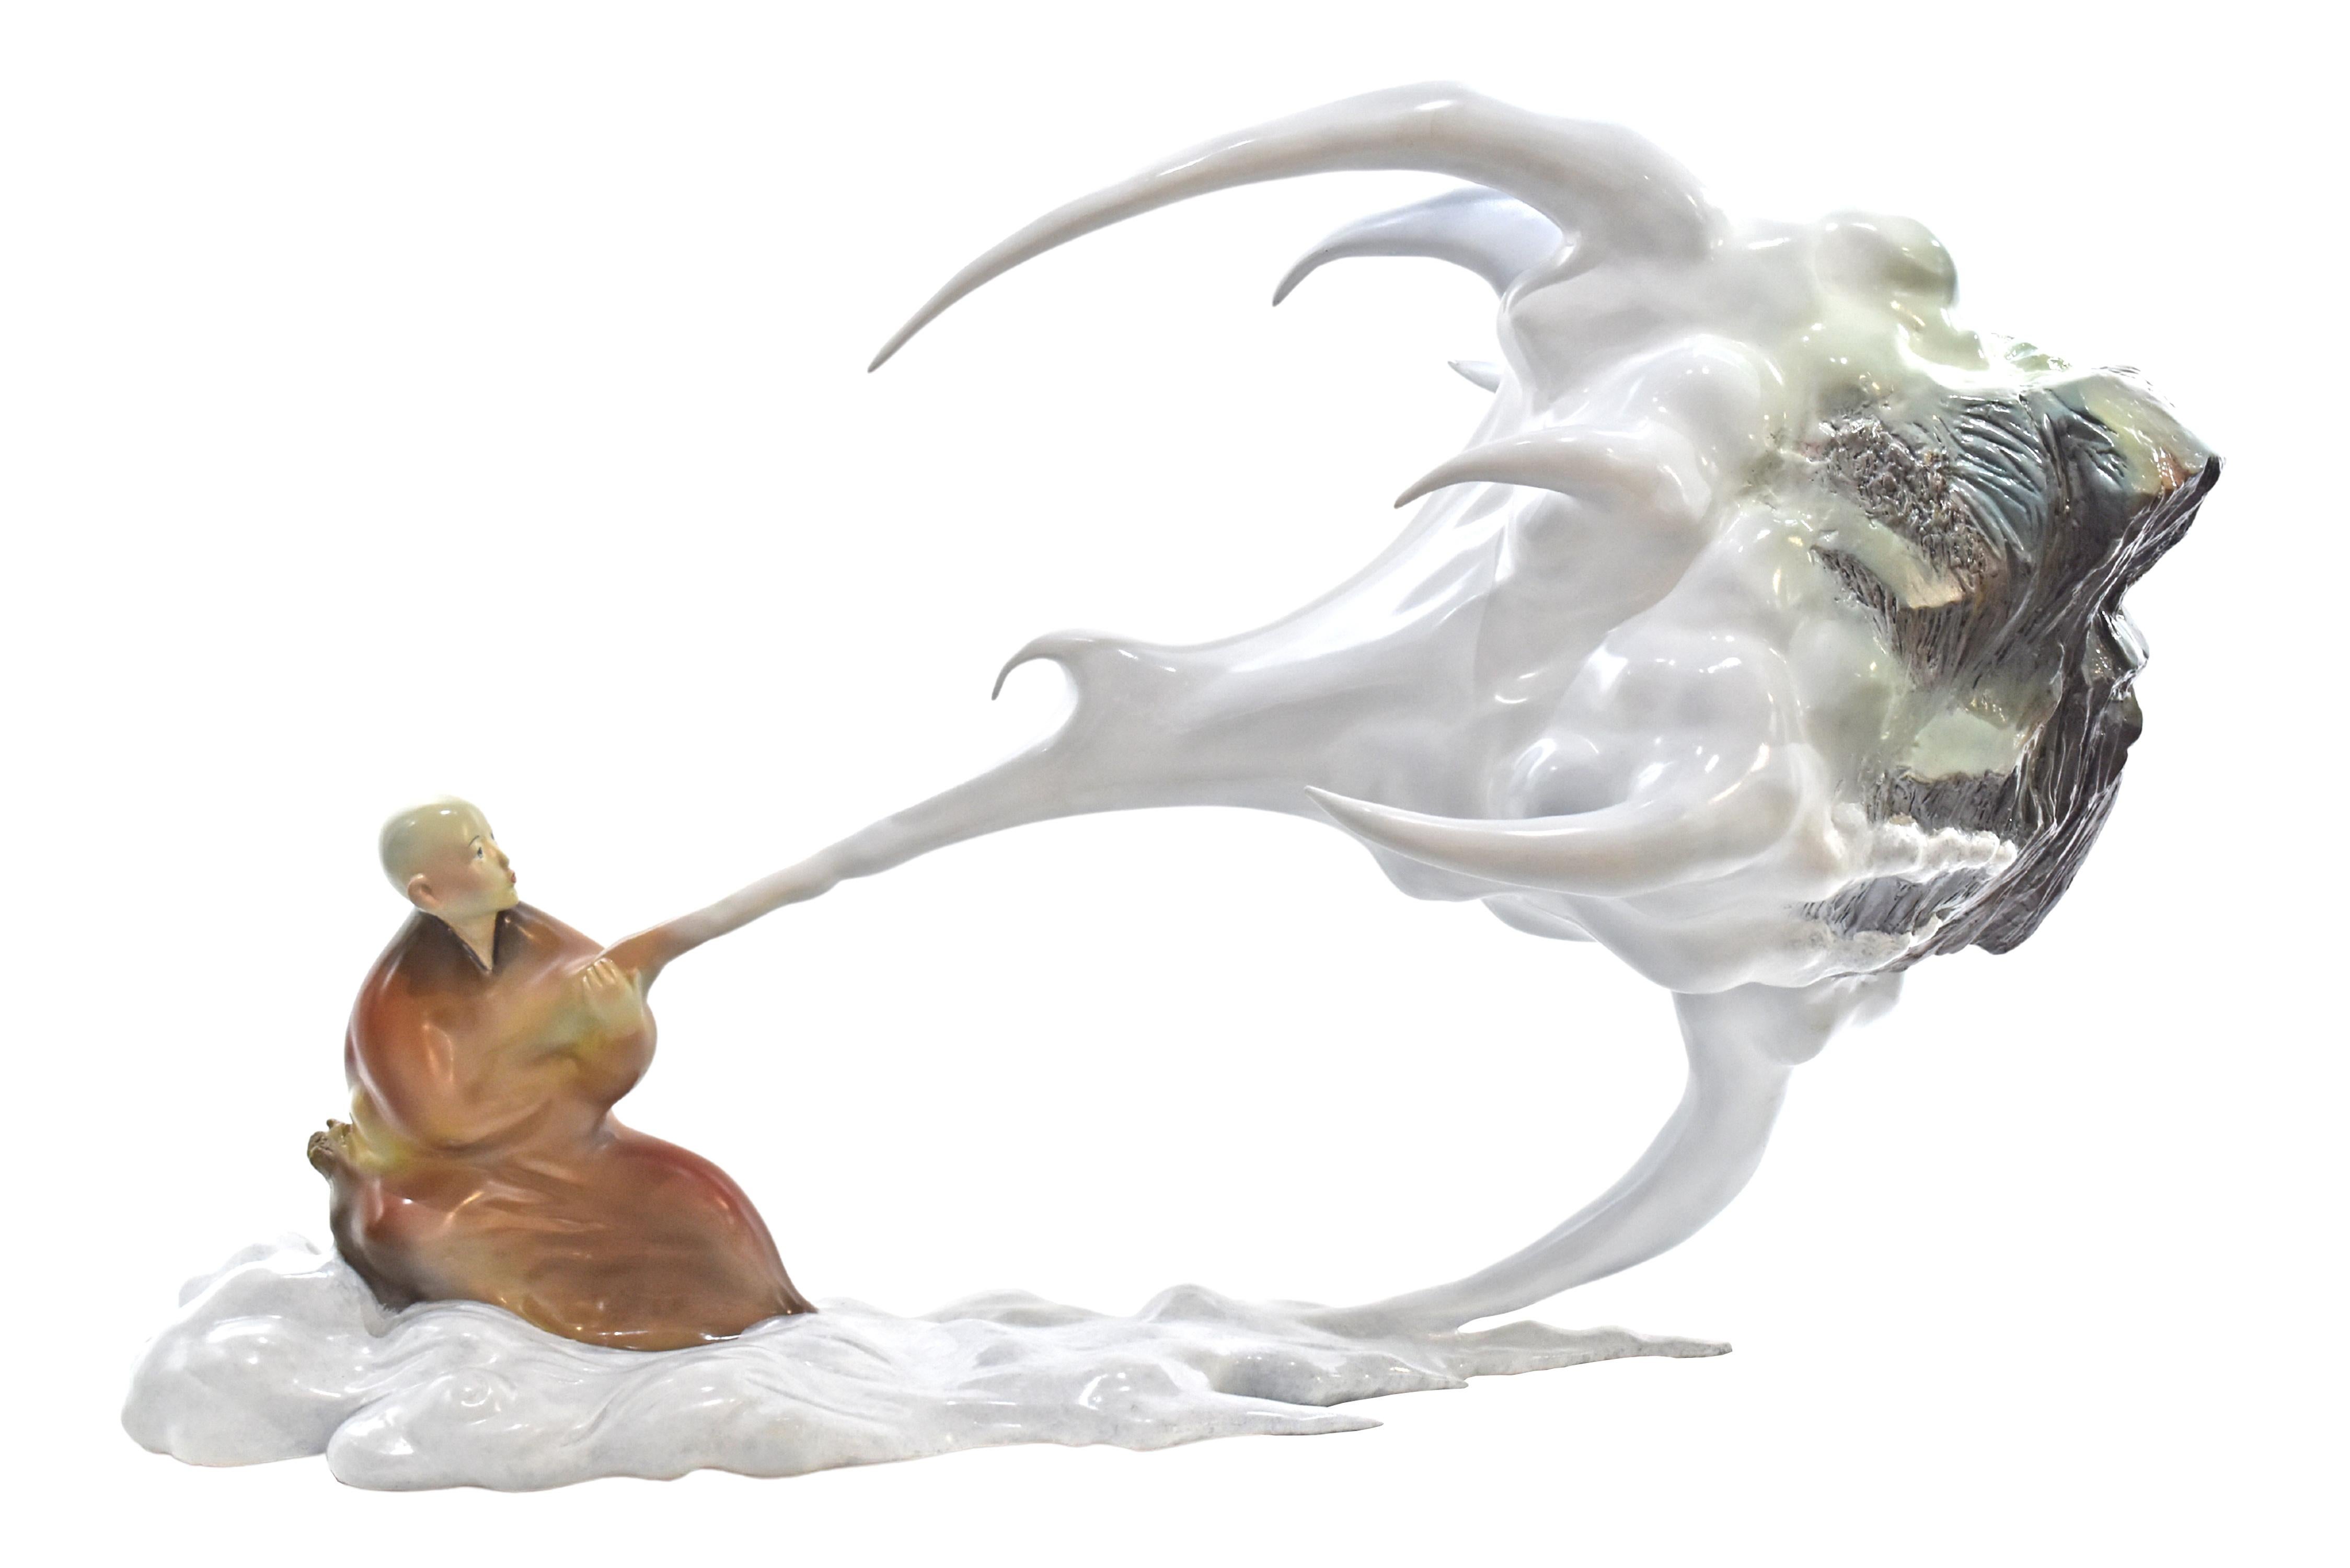 Lei Lei Still-Life Sculpture - Cloud, Action Figurative Scholar Shooting, Calm, Impression Serenity, In Stock